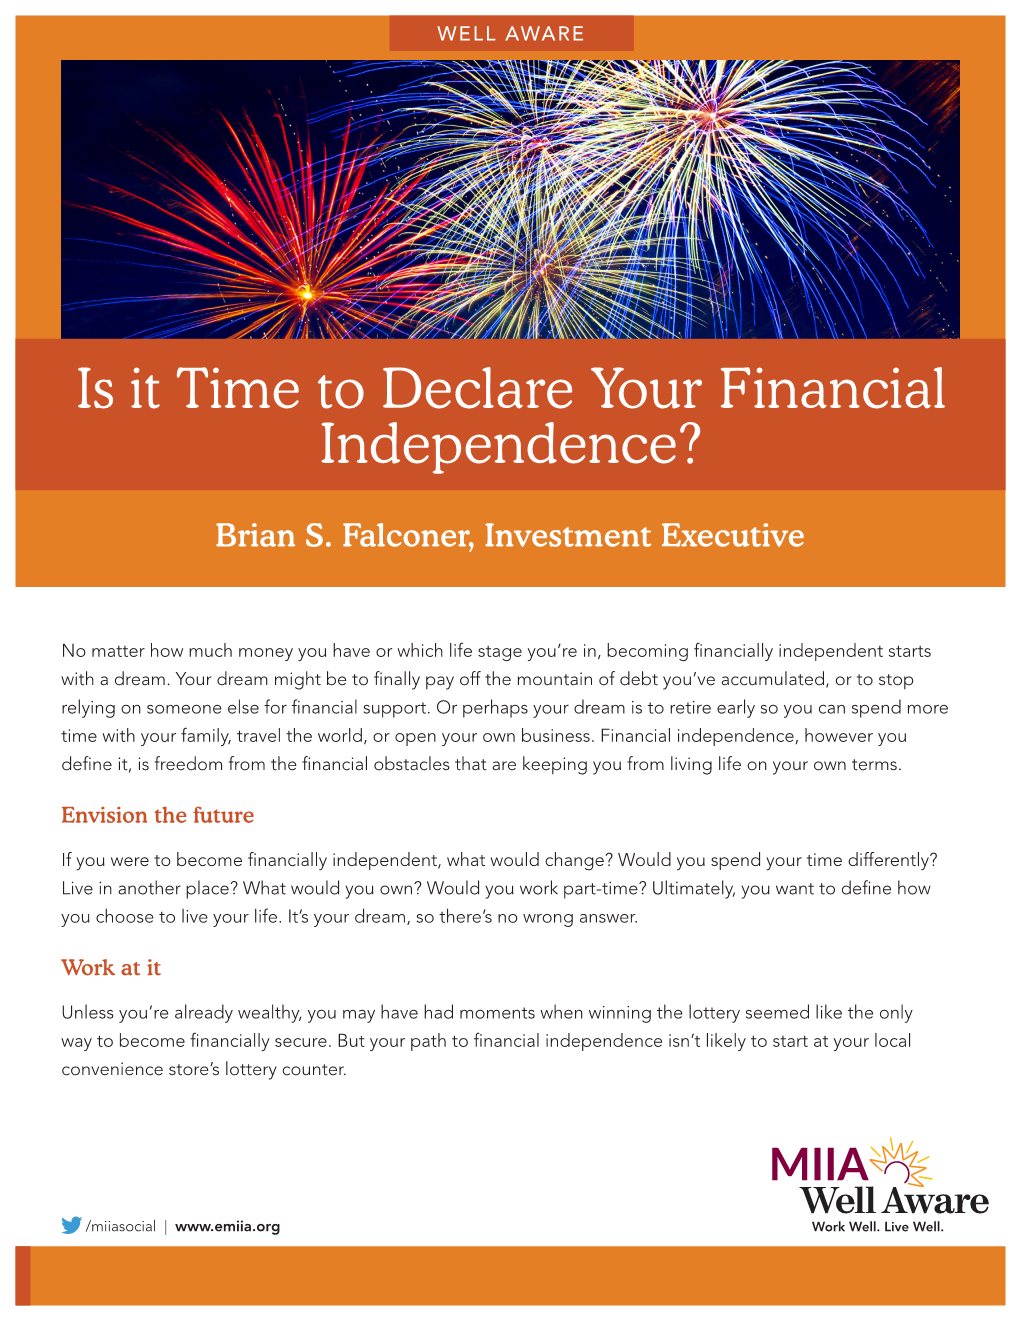 Is It Time to Declare Your Financial Independence?